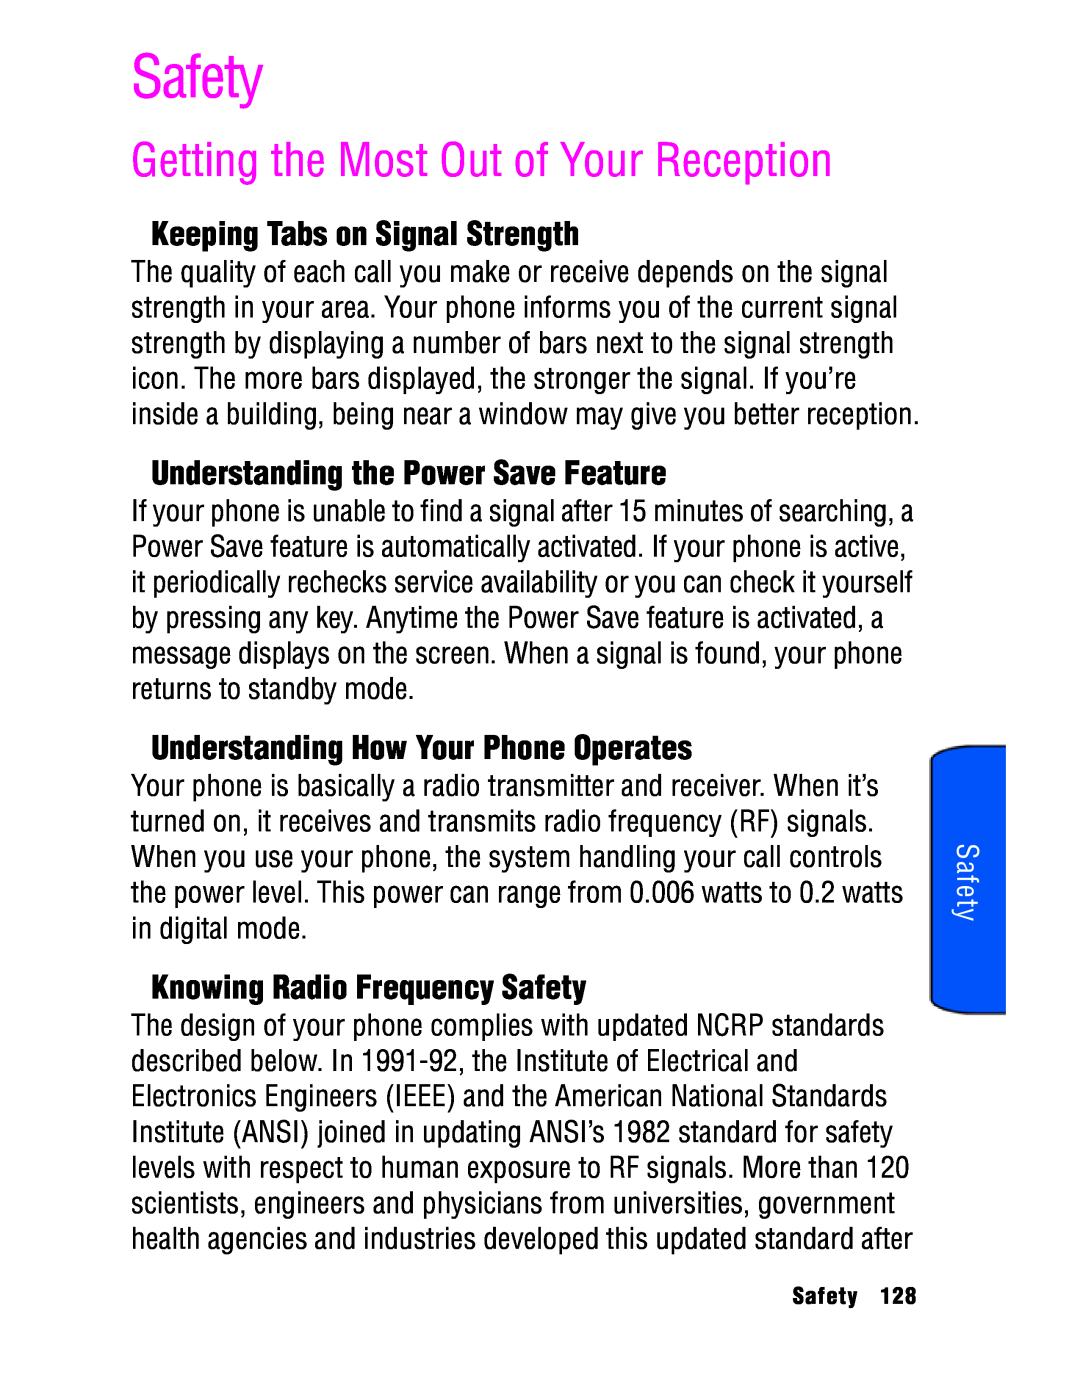 Samsung SPH-a740 manual Safety, Getting the Most Out of Your Reception, Keeping Tabs on Signal Strength 